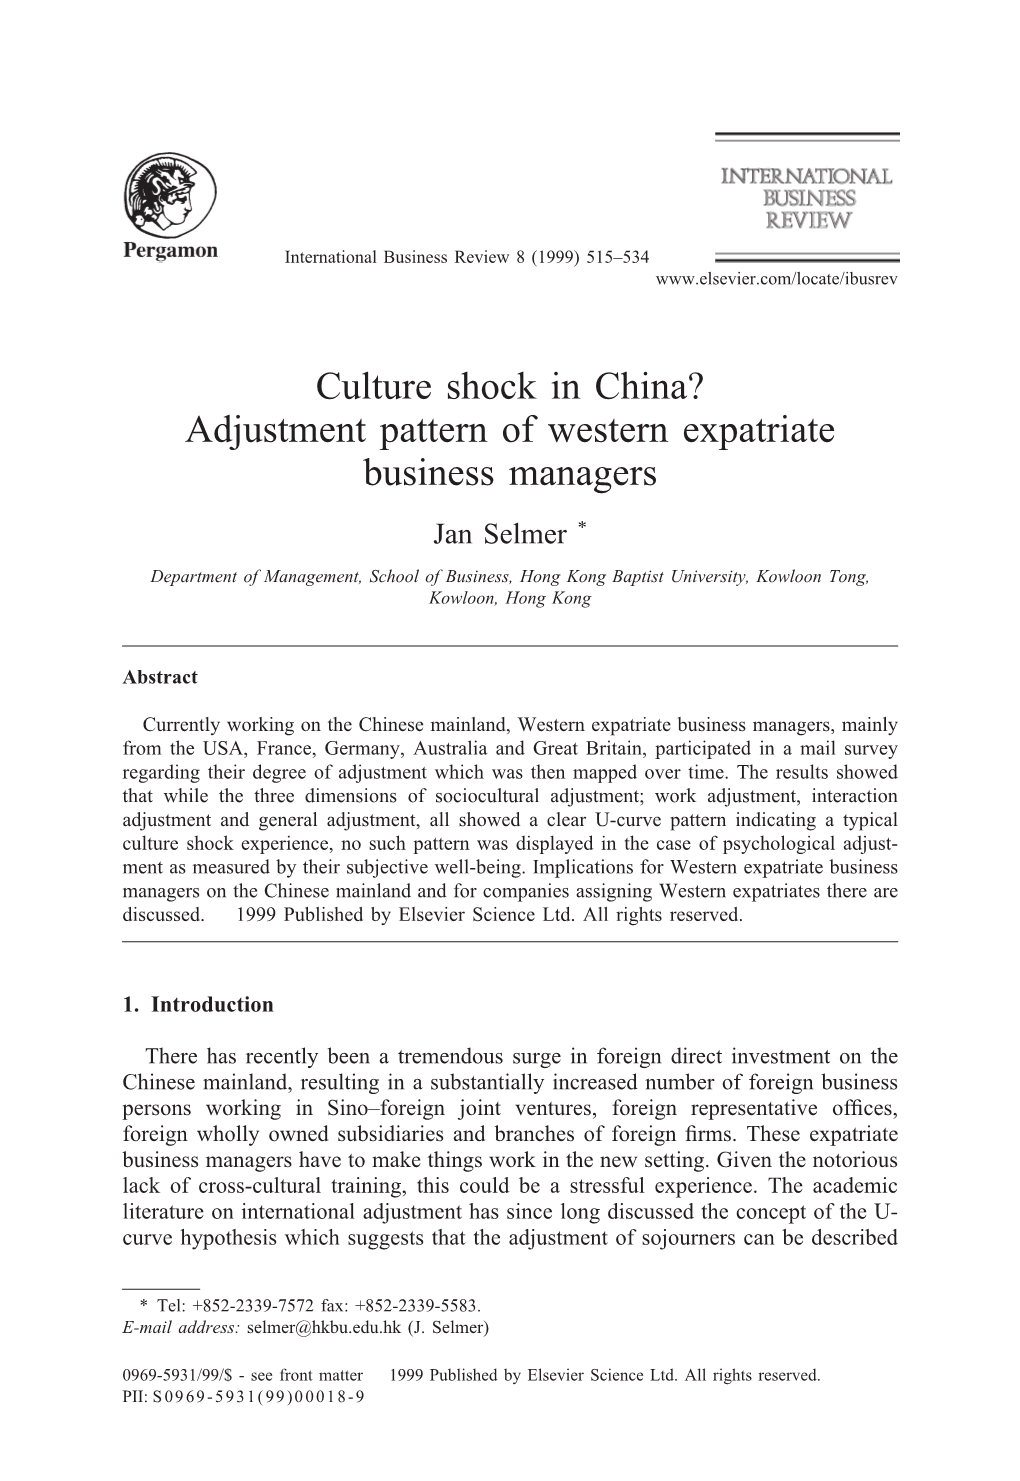 Culture Shock in China? Adjustment Pattern of Western Expatriate Business Managers